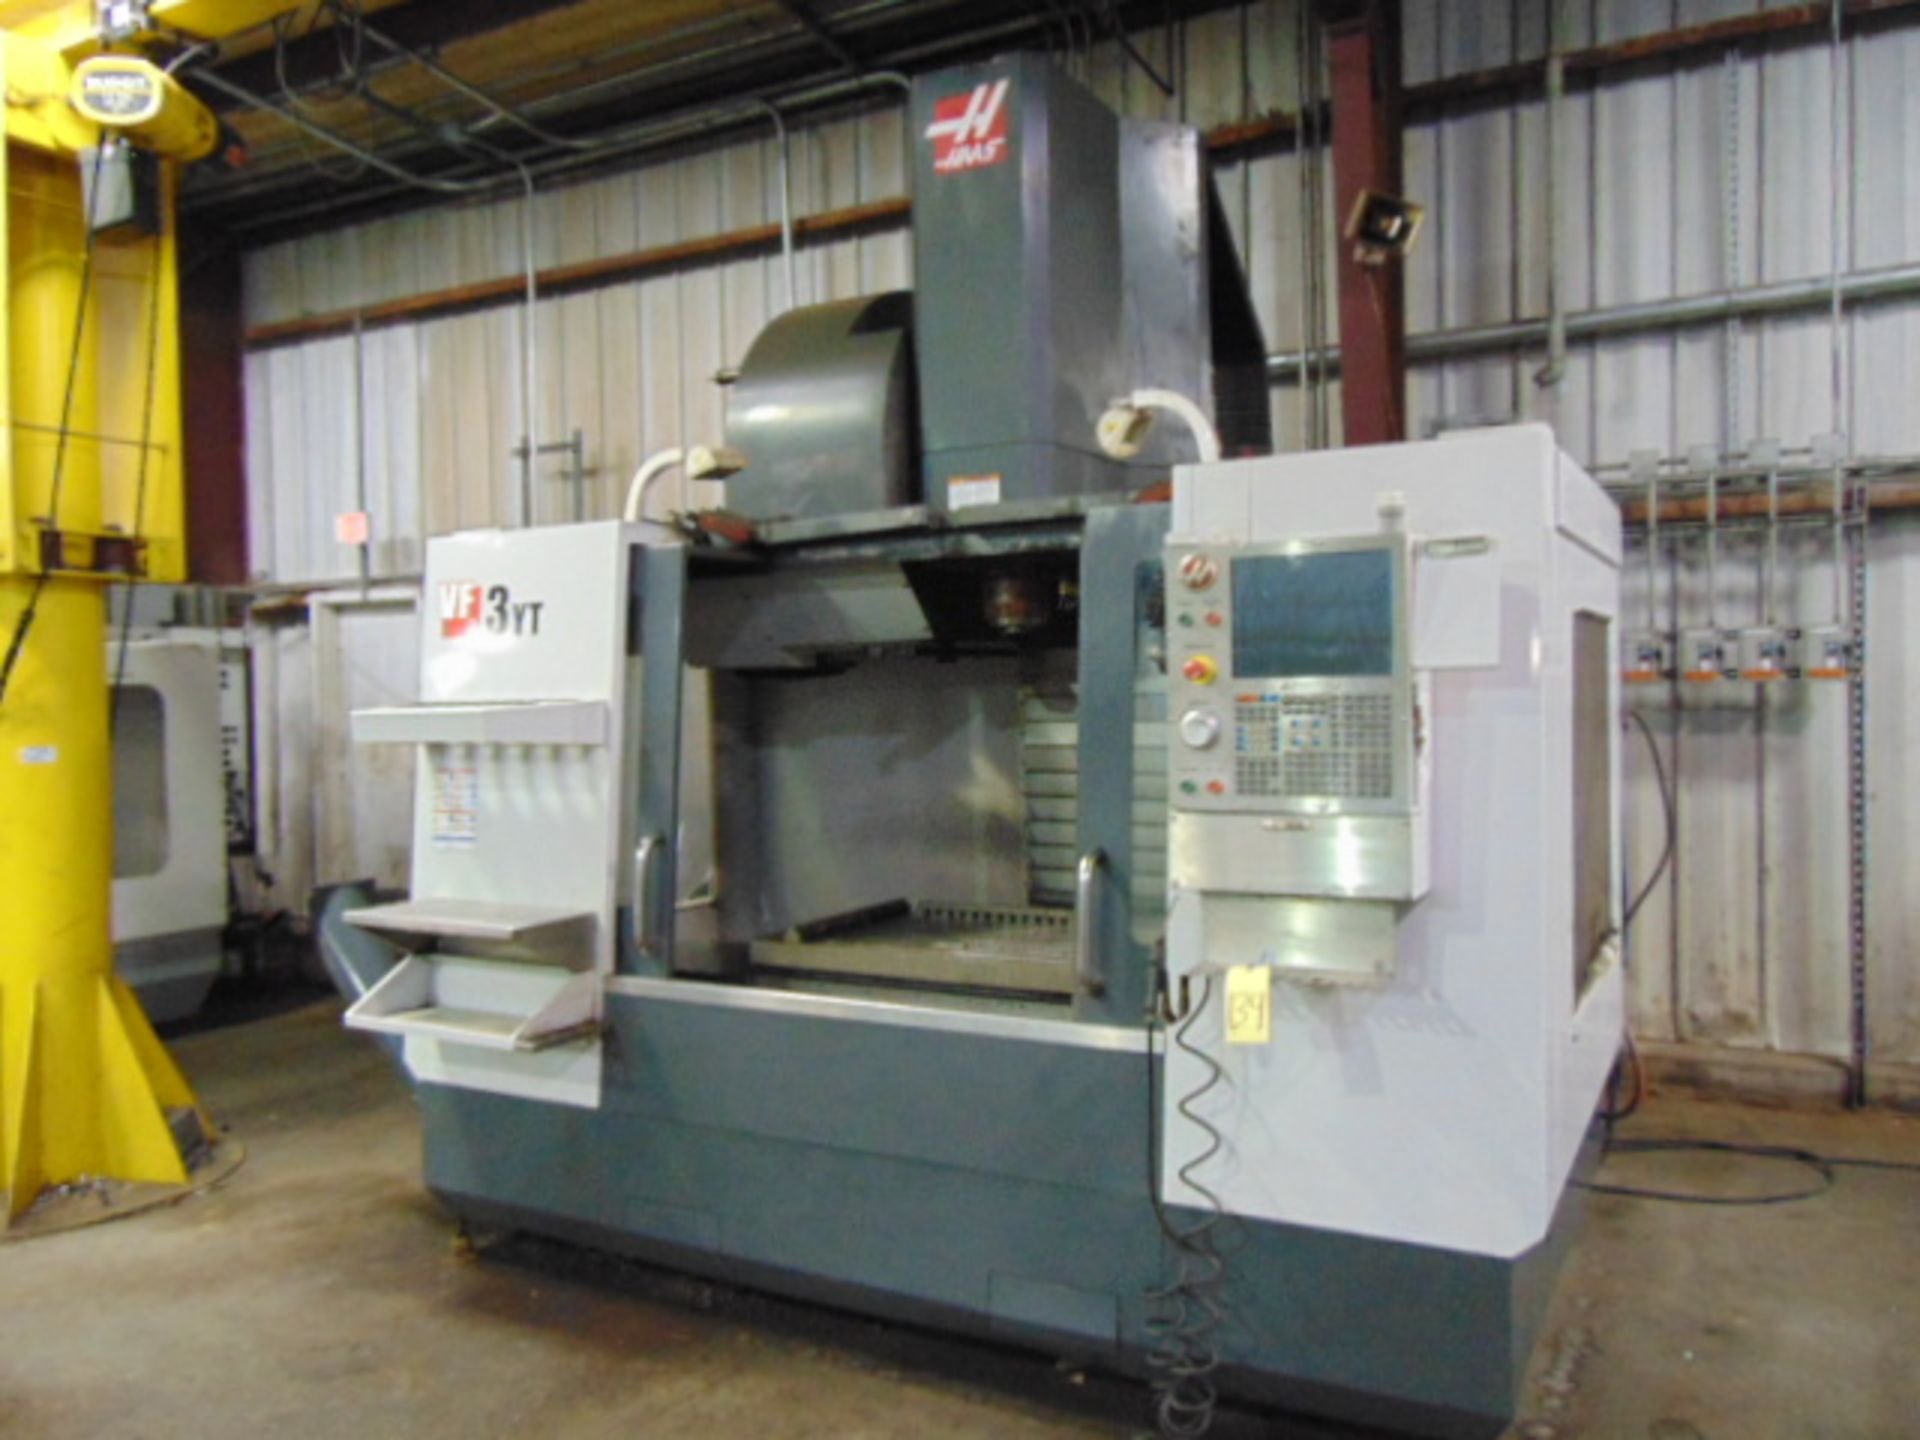 VERTICAL MACHINING CENTER, HAAS MDL. VF3YT/50, new 9/2013, 24” x 54” table, 40” X-axis travel, 26”